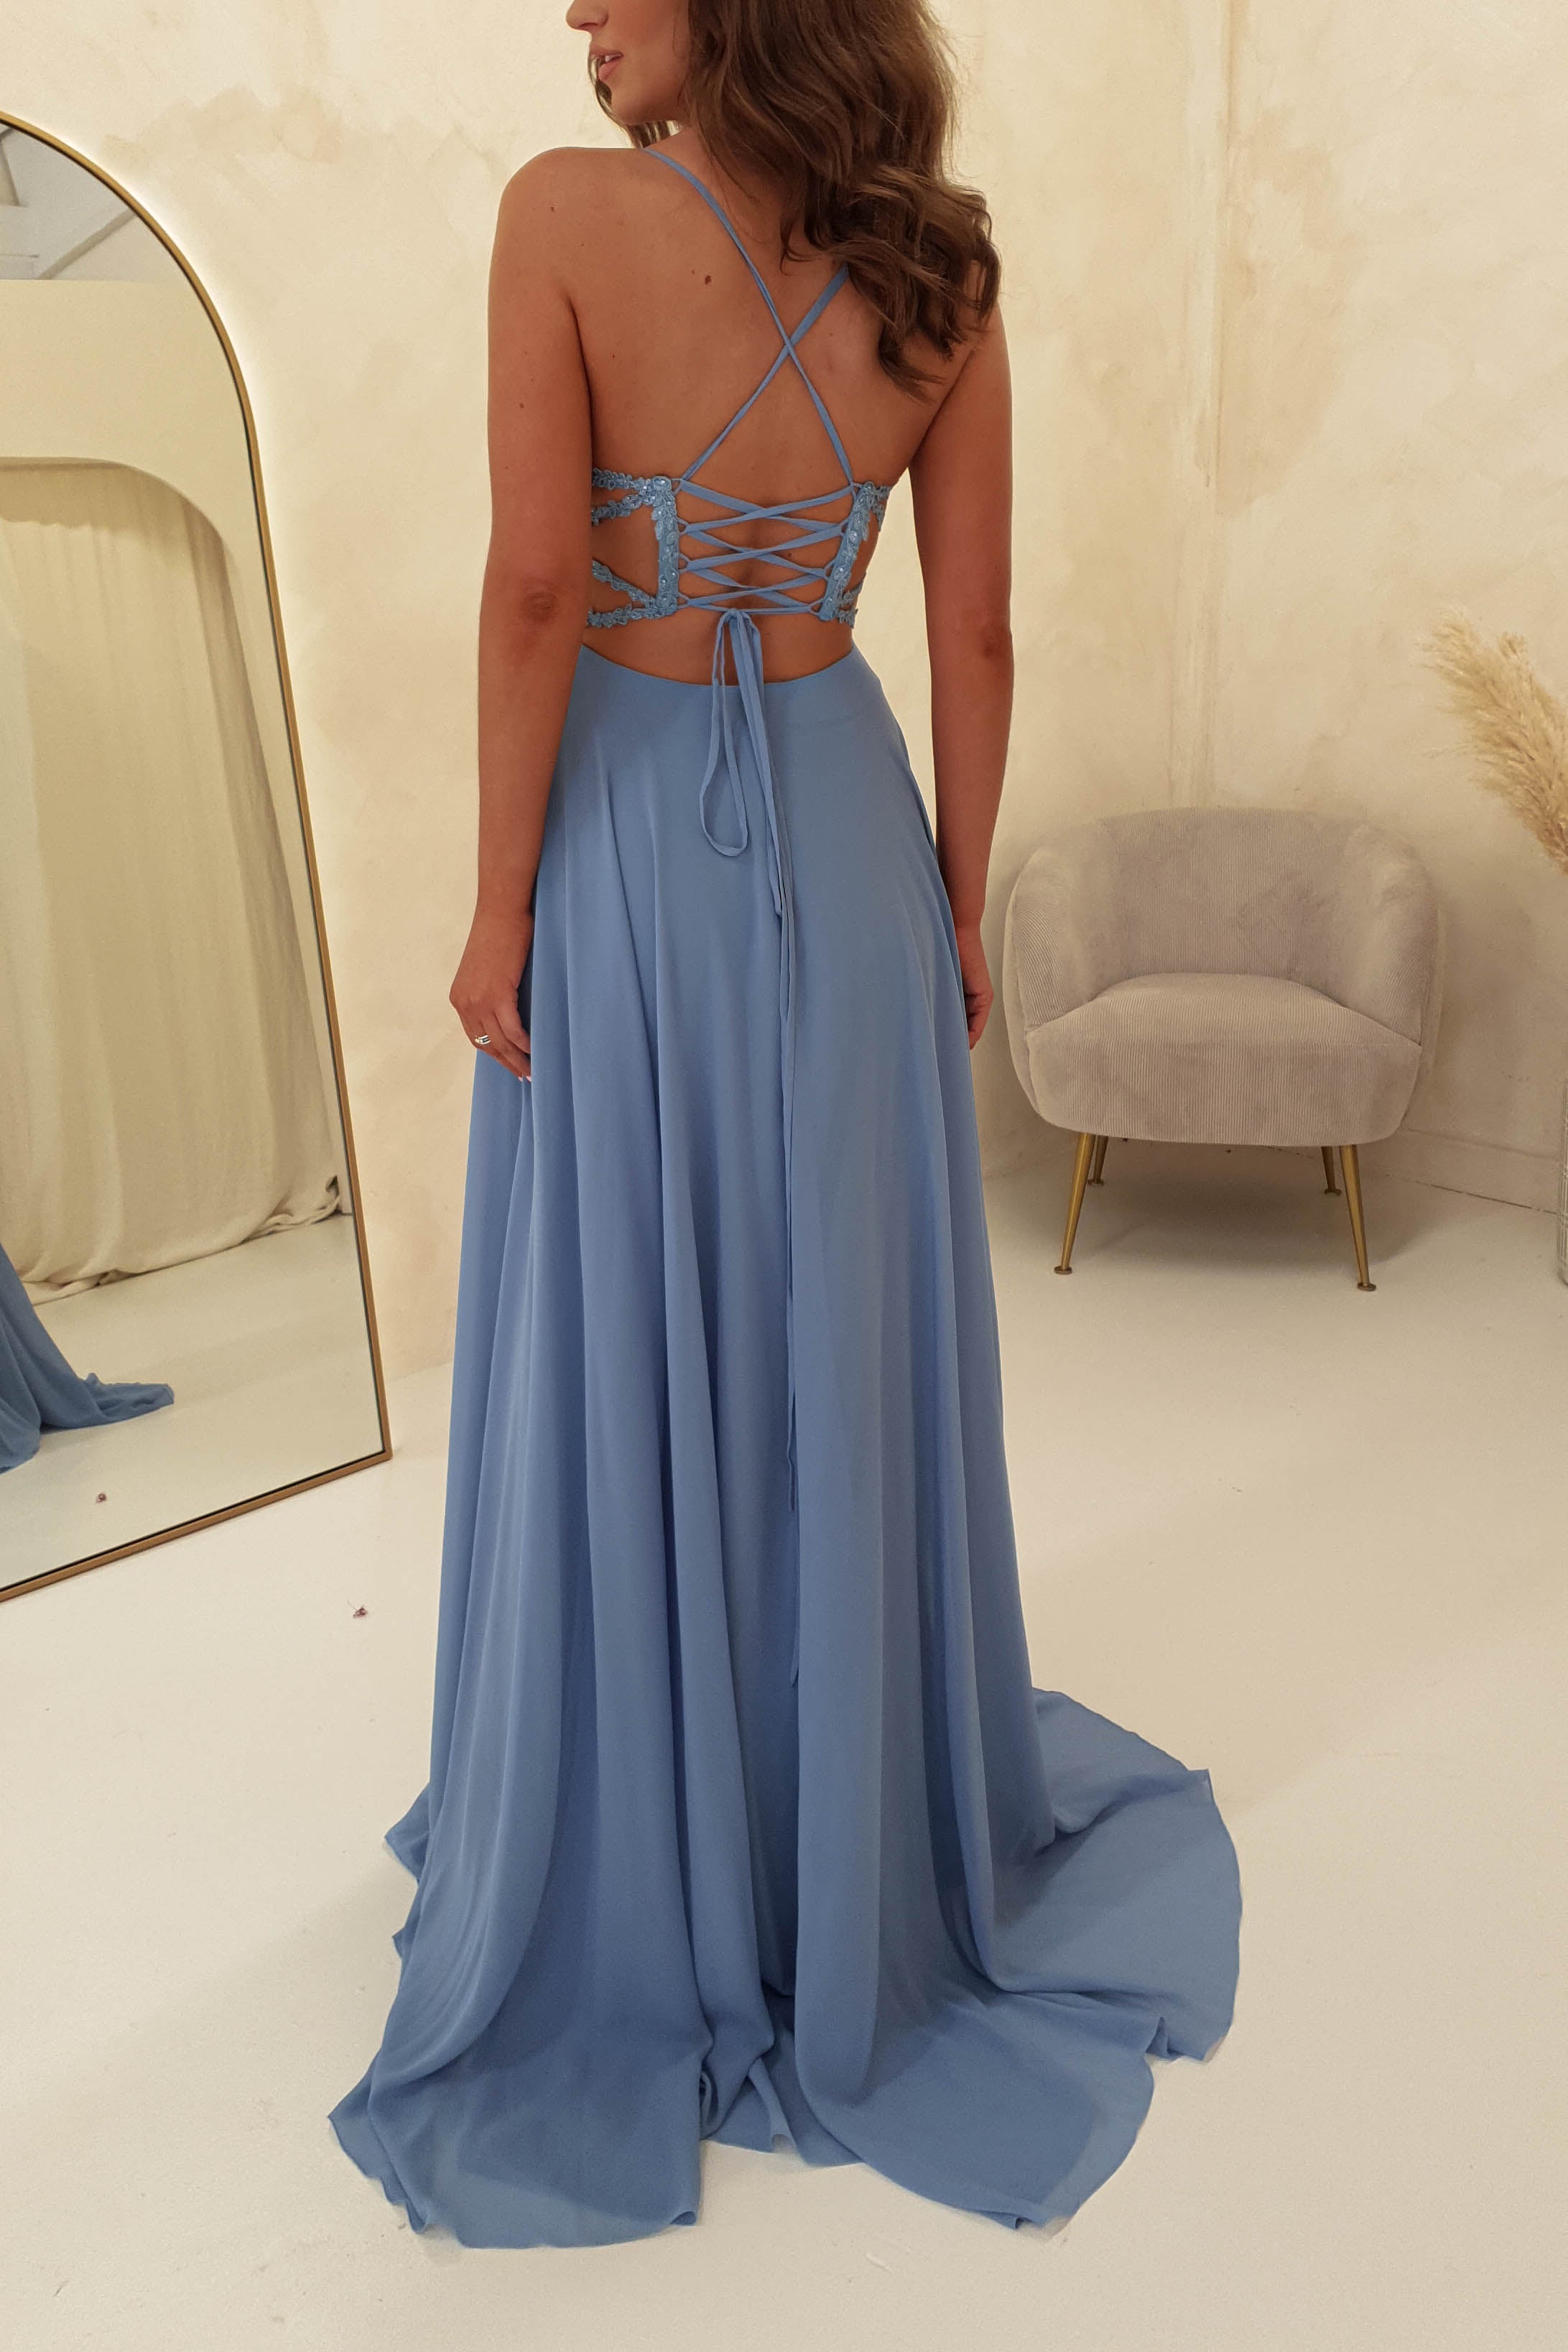 done-f8023-dusty-blue-embellished-gown-with-lace-up-back-dusty-blue-pink-bloom-bethy-soft-chiffon-maxi-dusty-blue-bridesmaid-prom-dress-dress-50421860008277.jpg